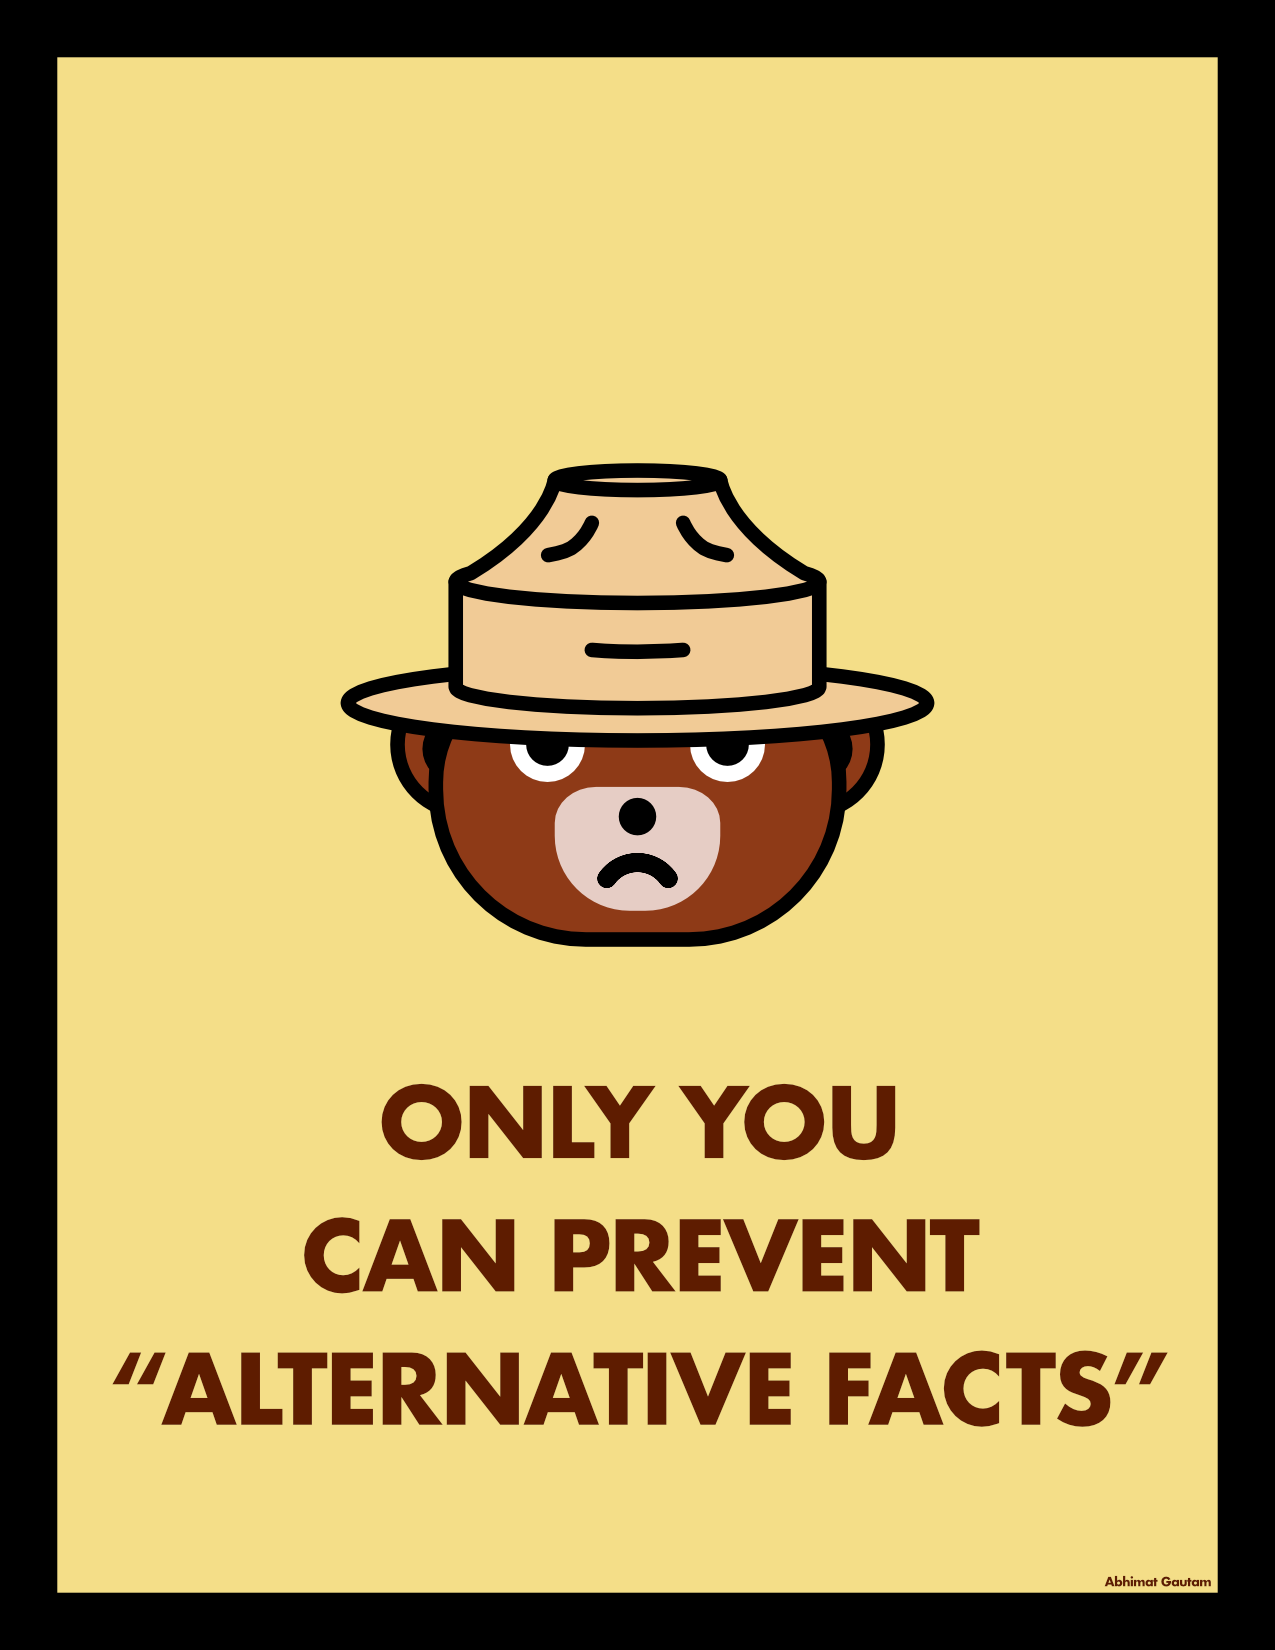 Smokey says only you can prevent Alternative Facts